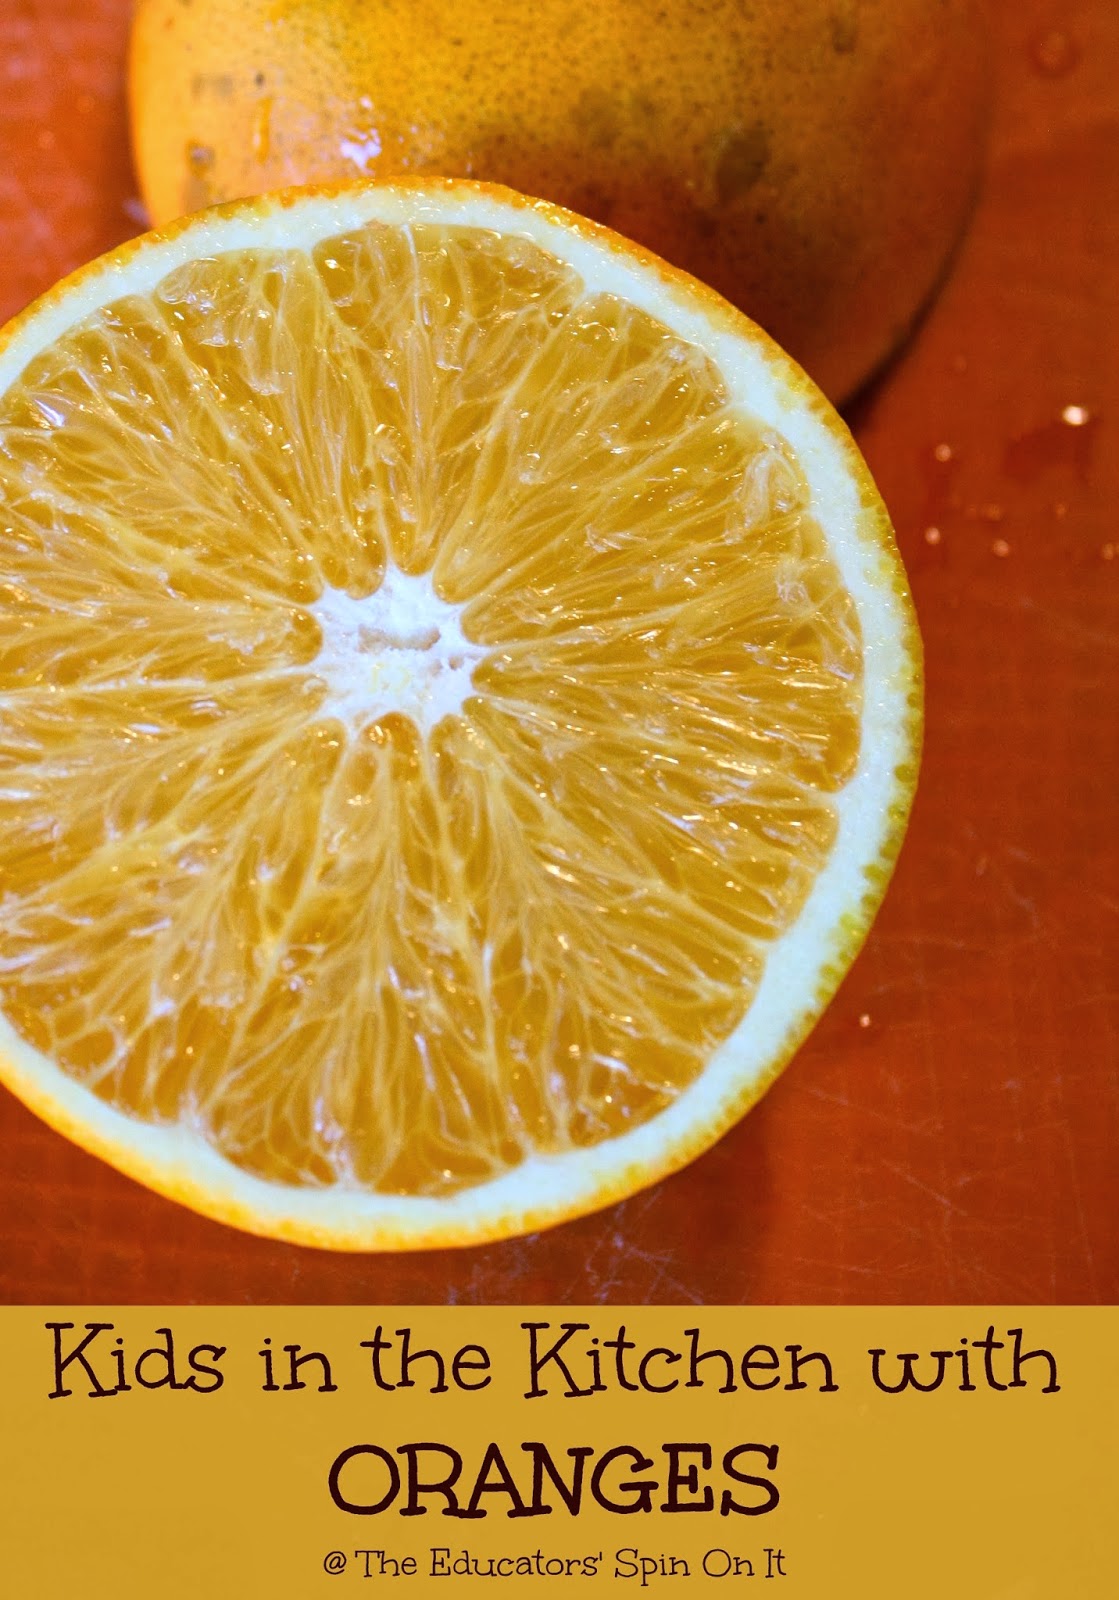 Kids in the Kitchen with Oranges